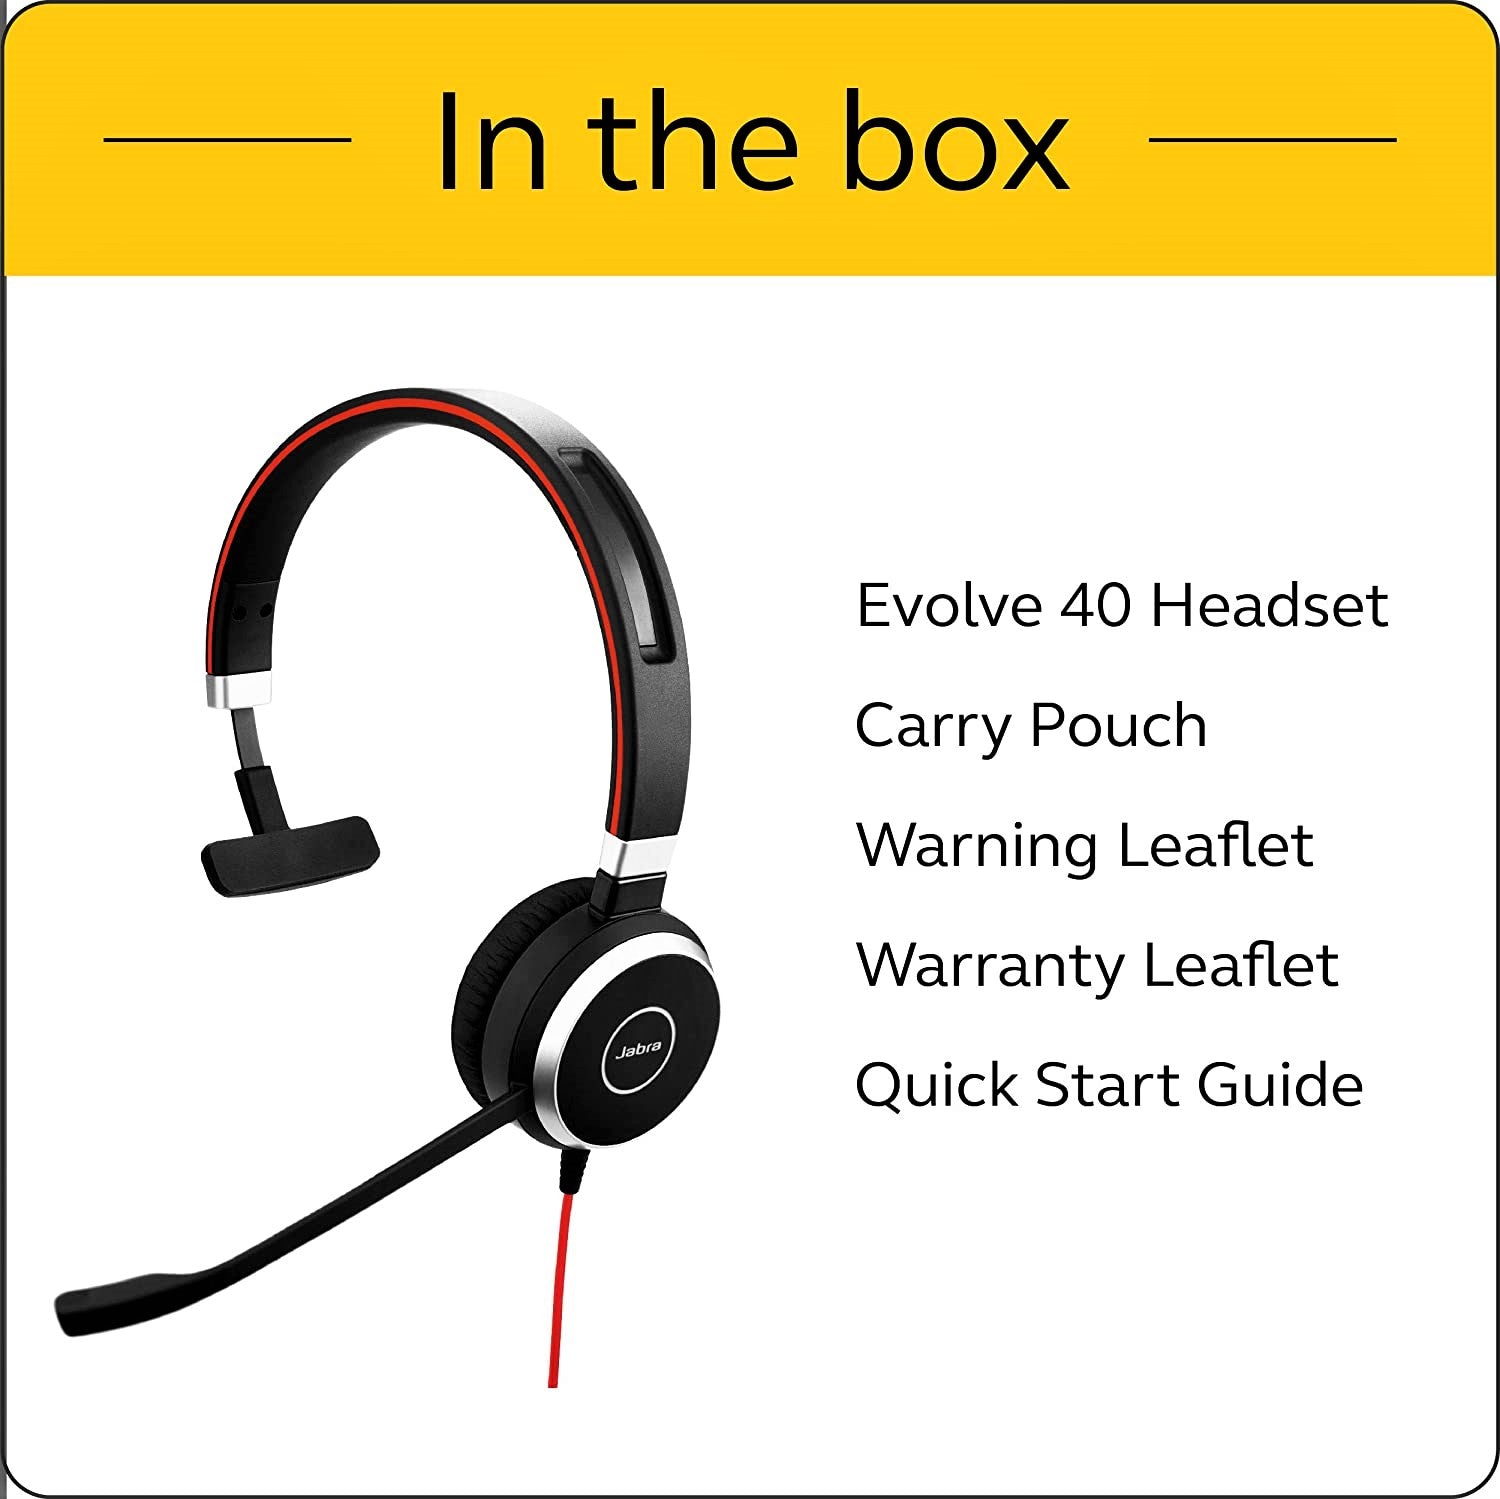 Jabra Evolve 40 MS Professional Wired Headset, Mono – Telephone Headset for Greater Productivity, Superior Sound for Calls and Music, 3.5mm Jack/USB Connection, All-Day Comfort Design, MS Optimized, Black, Mono Speaker (6393-823-109)